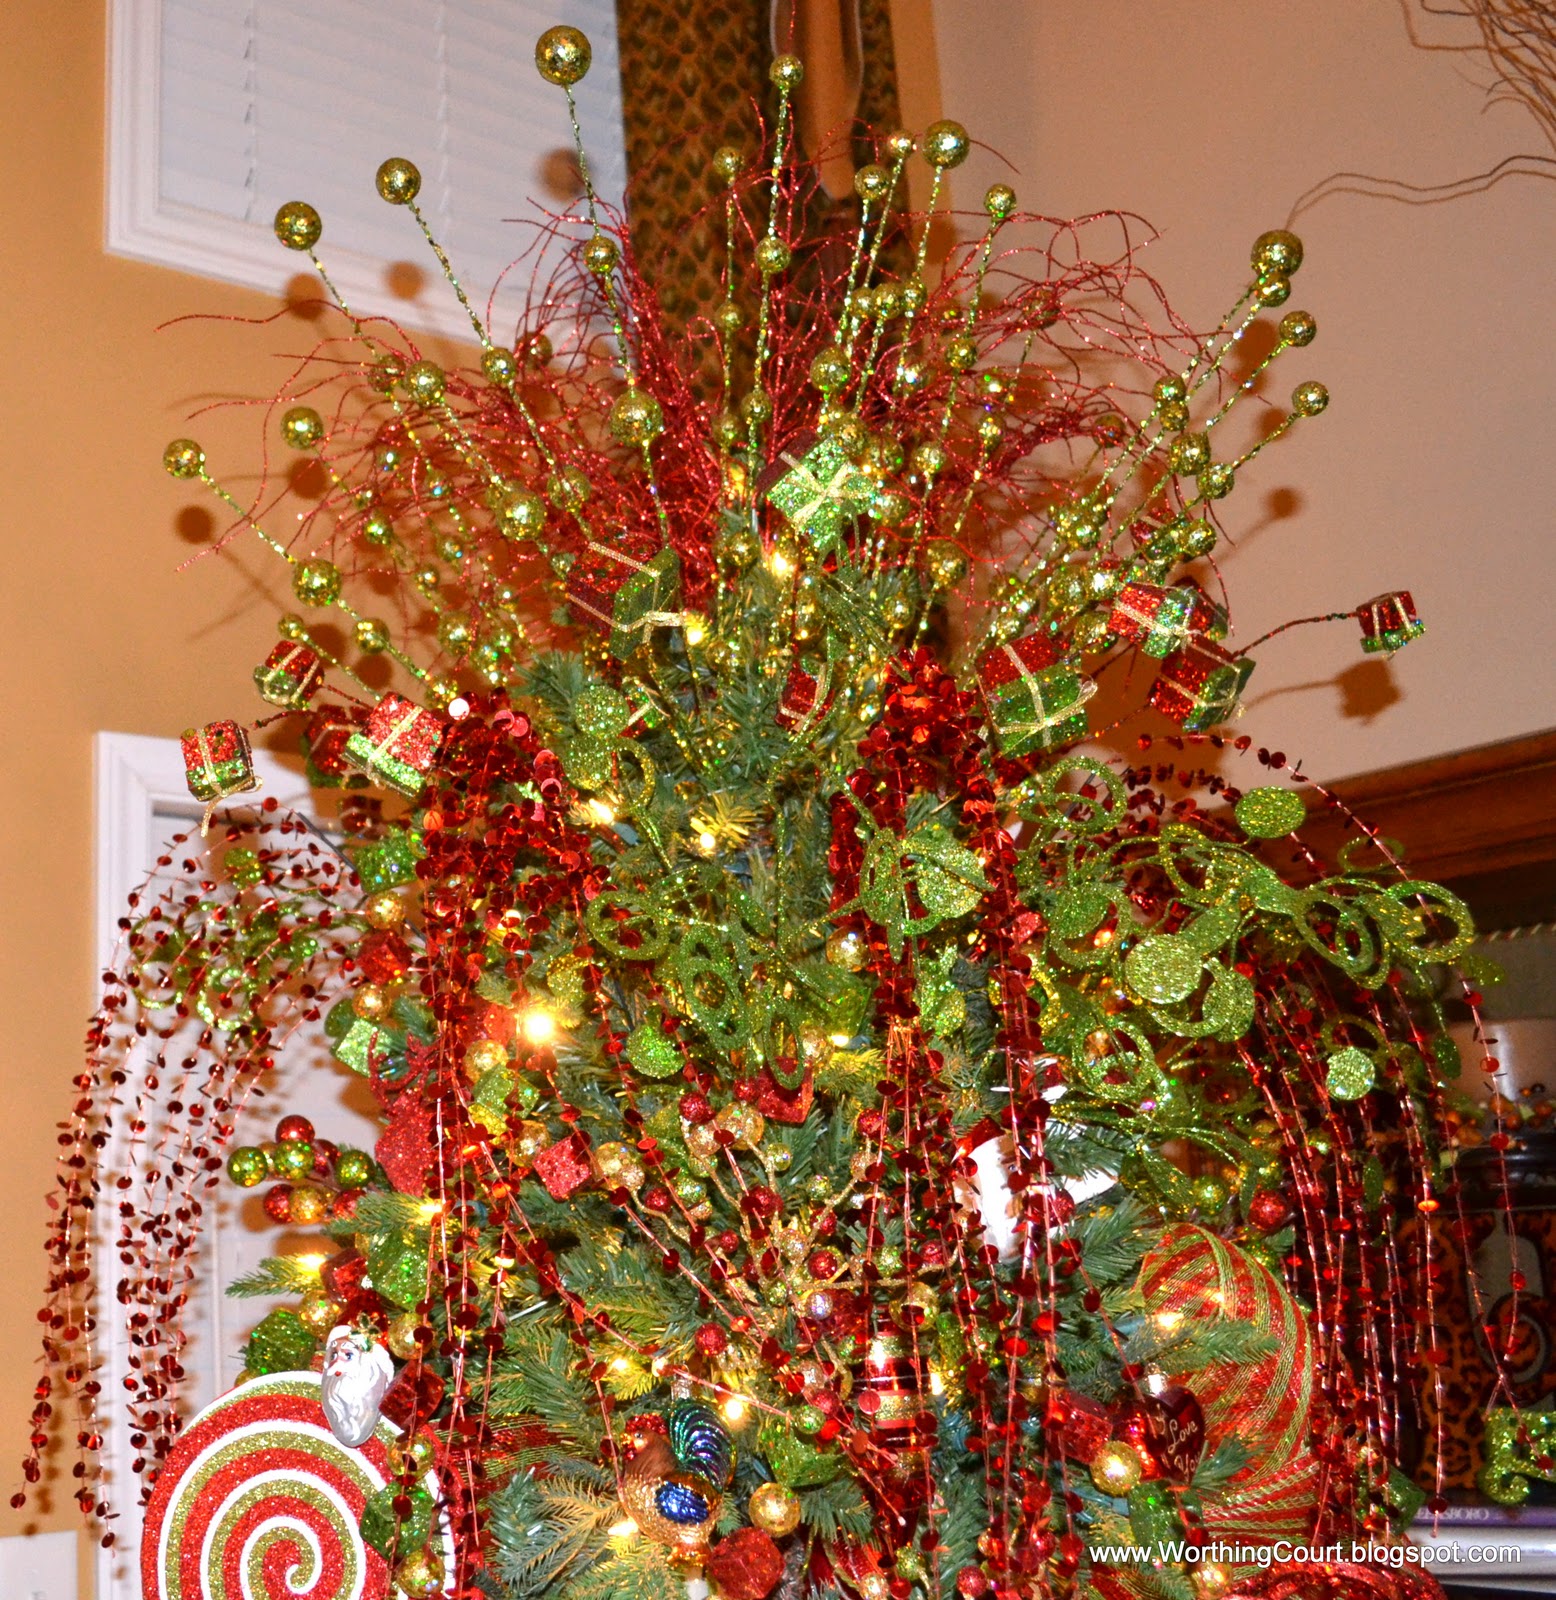 Pictures Of Christmas Trees Decorated With Mesh